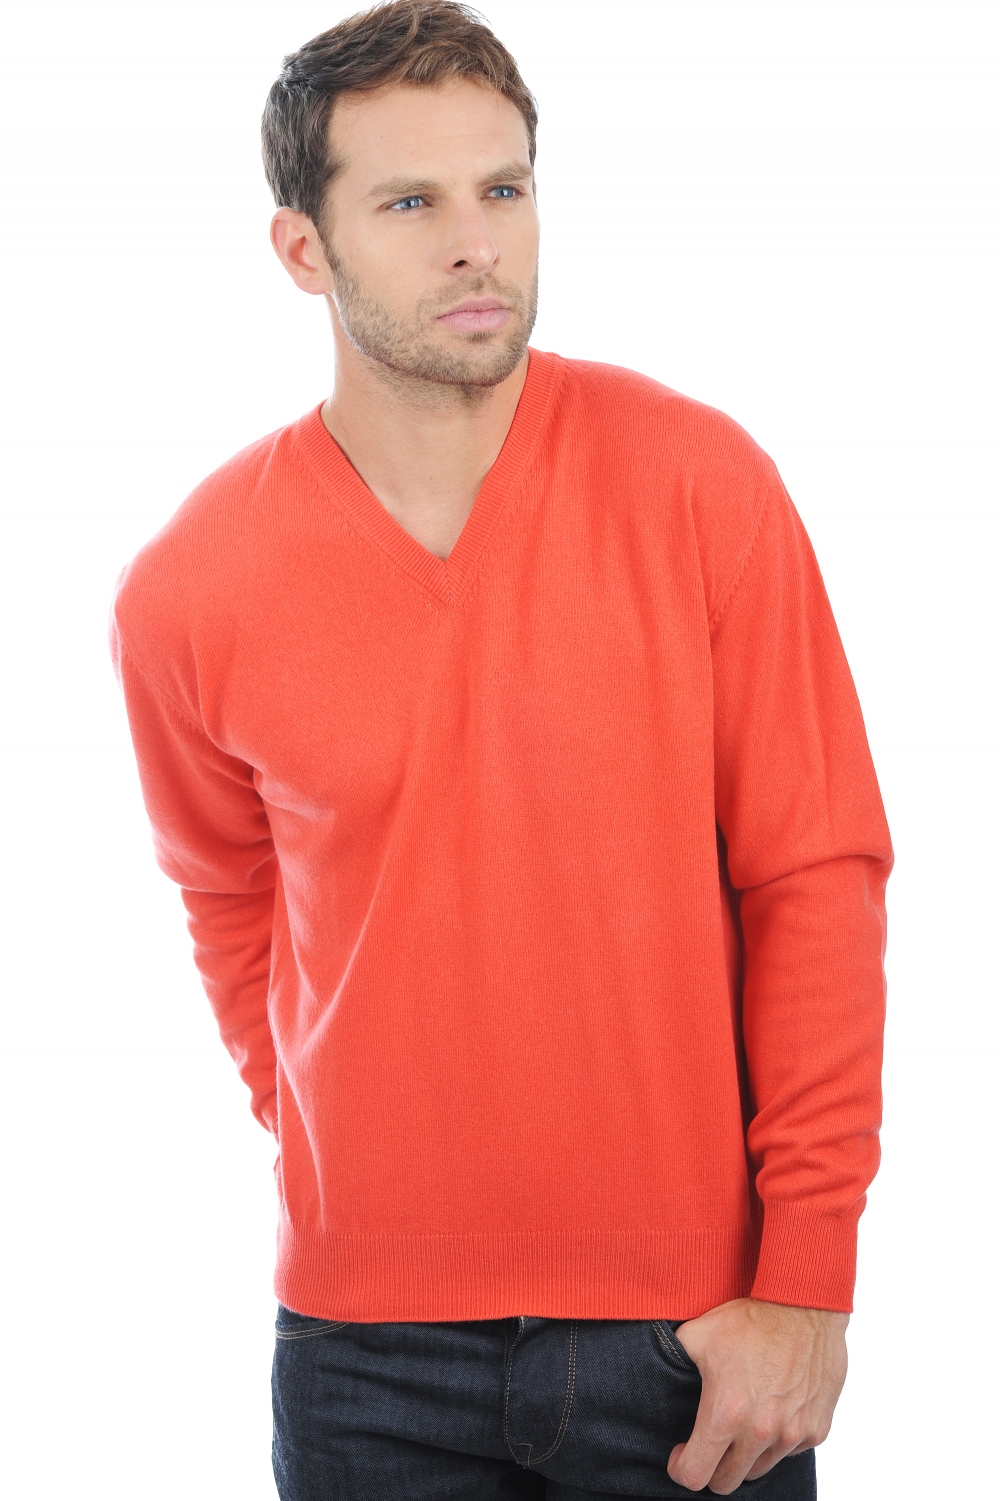 Cachemire pull homme col v gaspard corail lumineux l